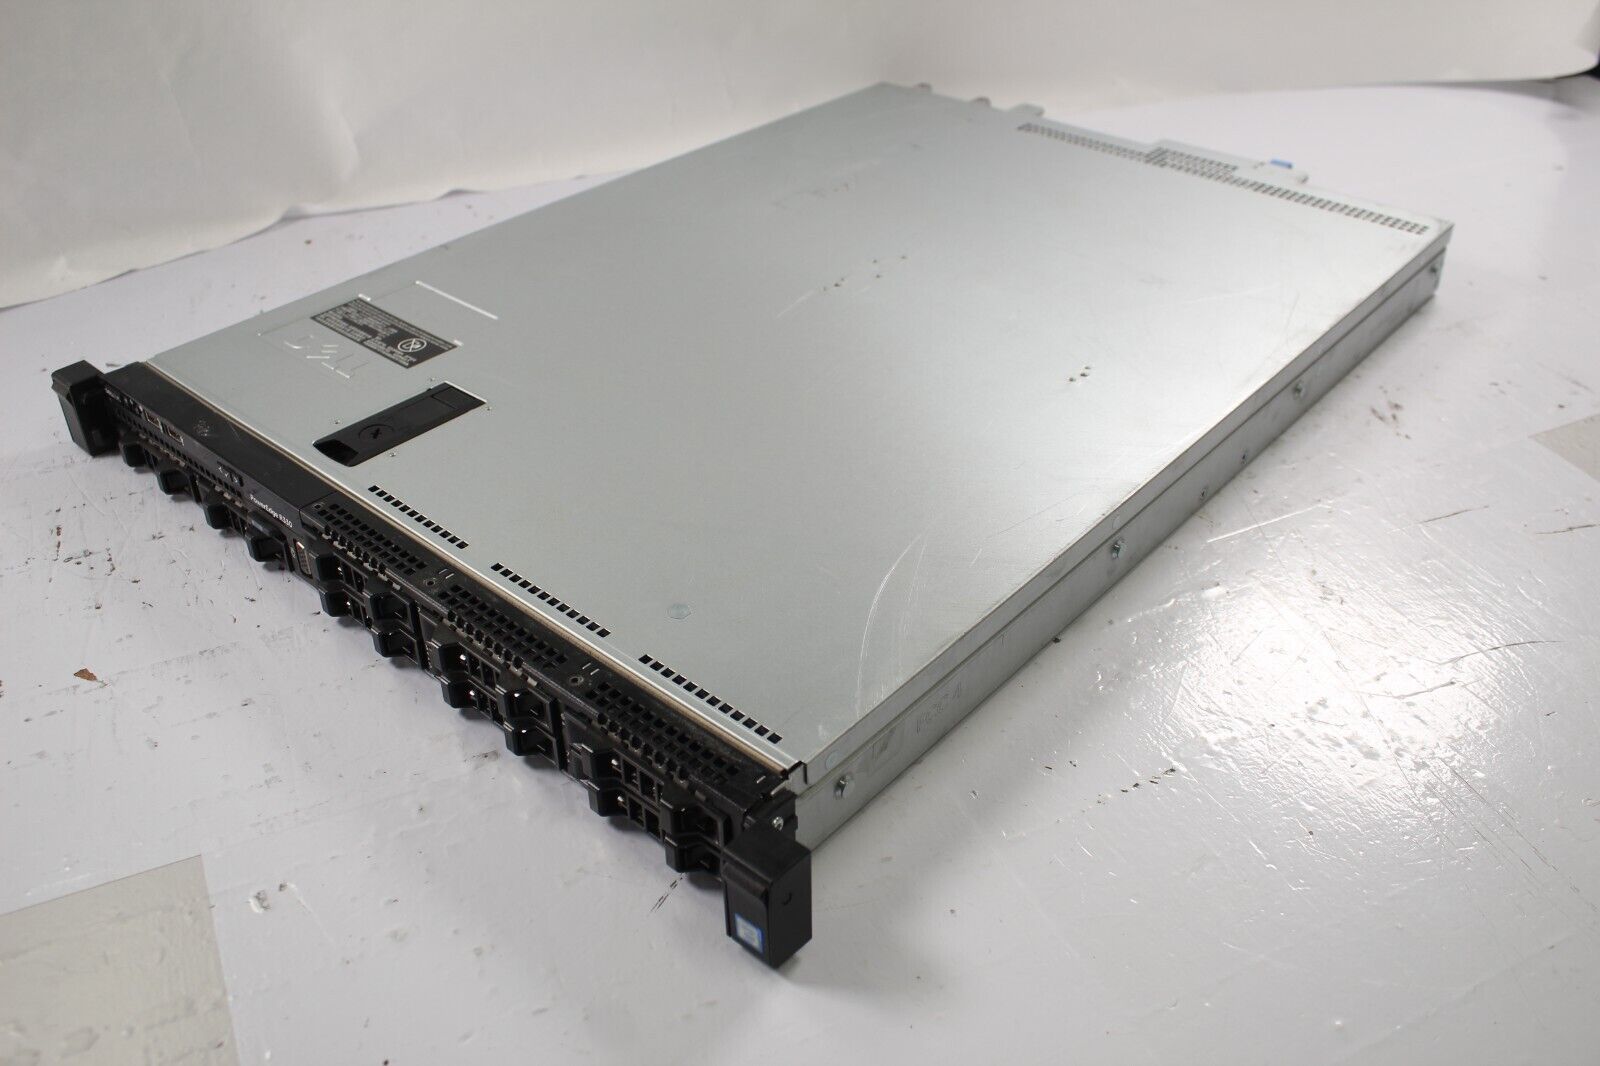 Dell PowerEdge R330 2*Xeon E3-1270 v6 16GB RAM No HDD Tested with latest BIOS